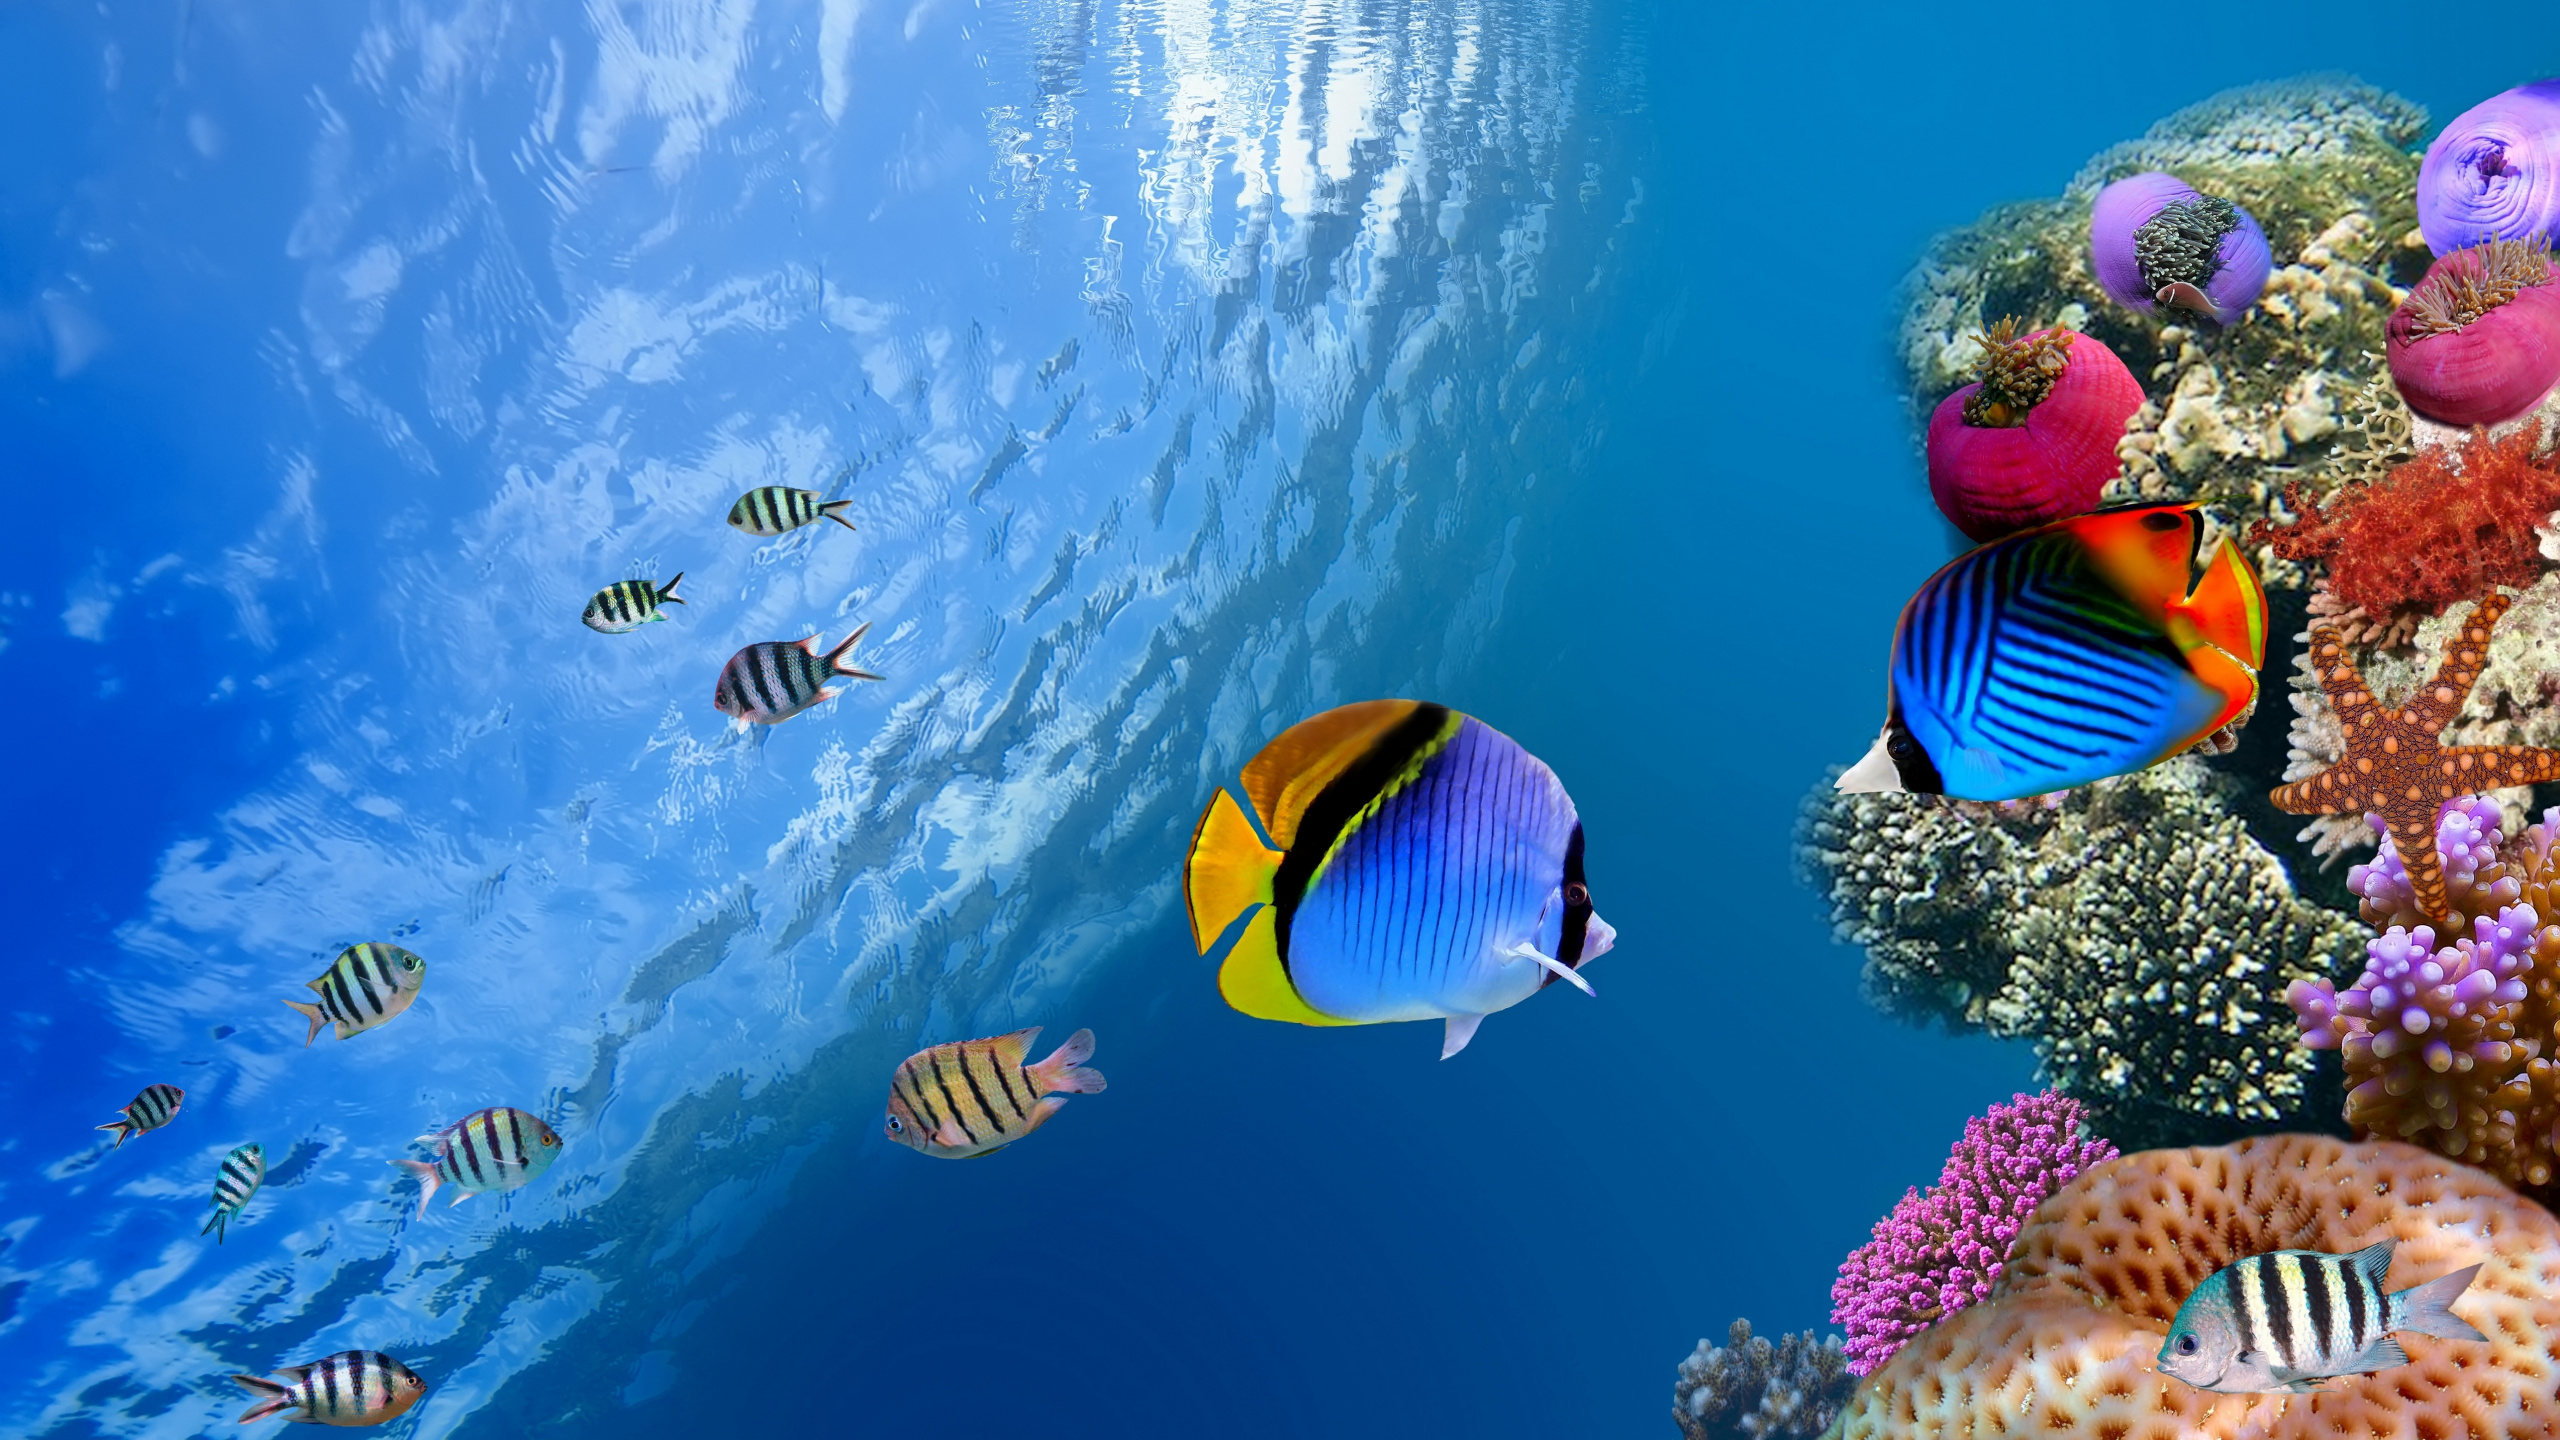 Man in Blue and White Striped Shirt With Blue and Yellow Fish in Water. Wallpaper in 2560x1440 Resolution